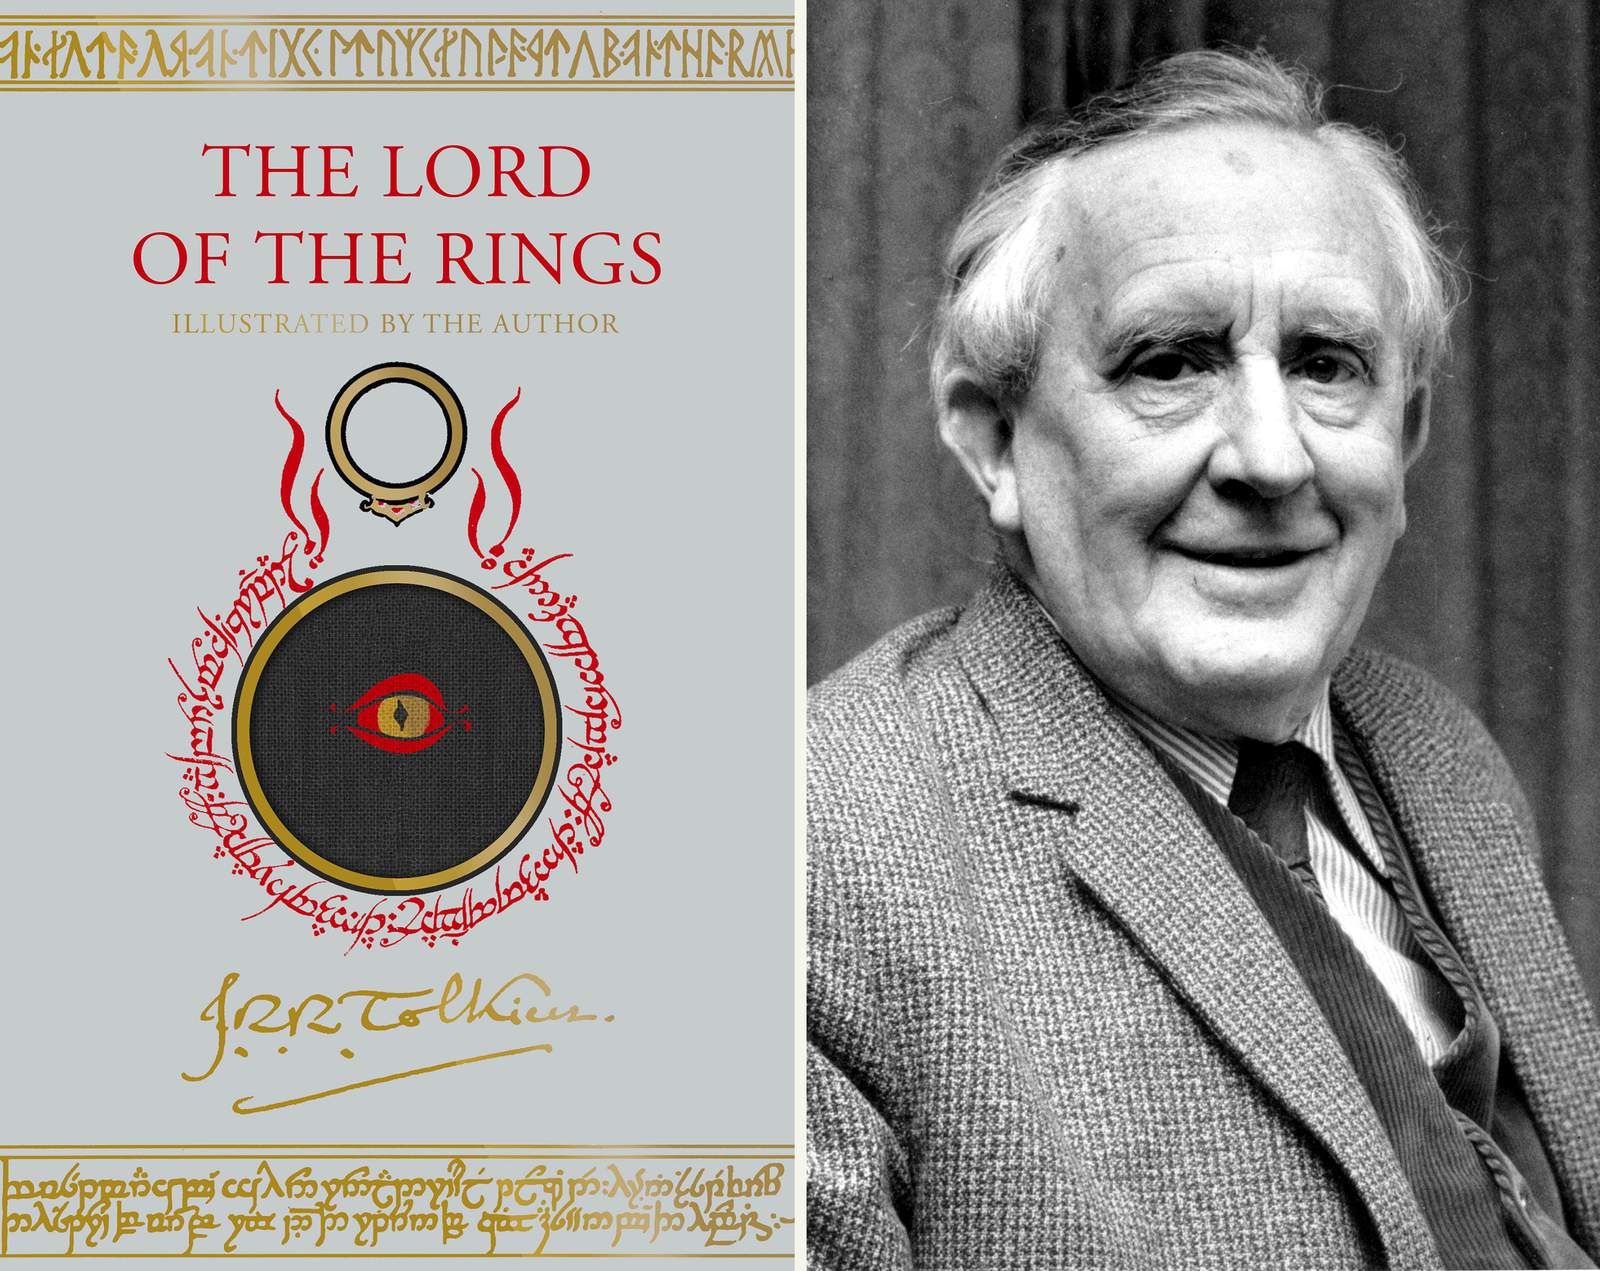 New 'Lord of the Rings' edition to include Tolkien artwork